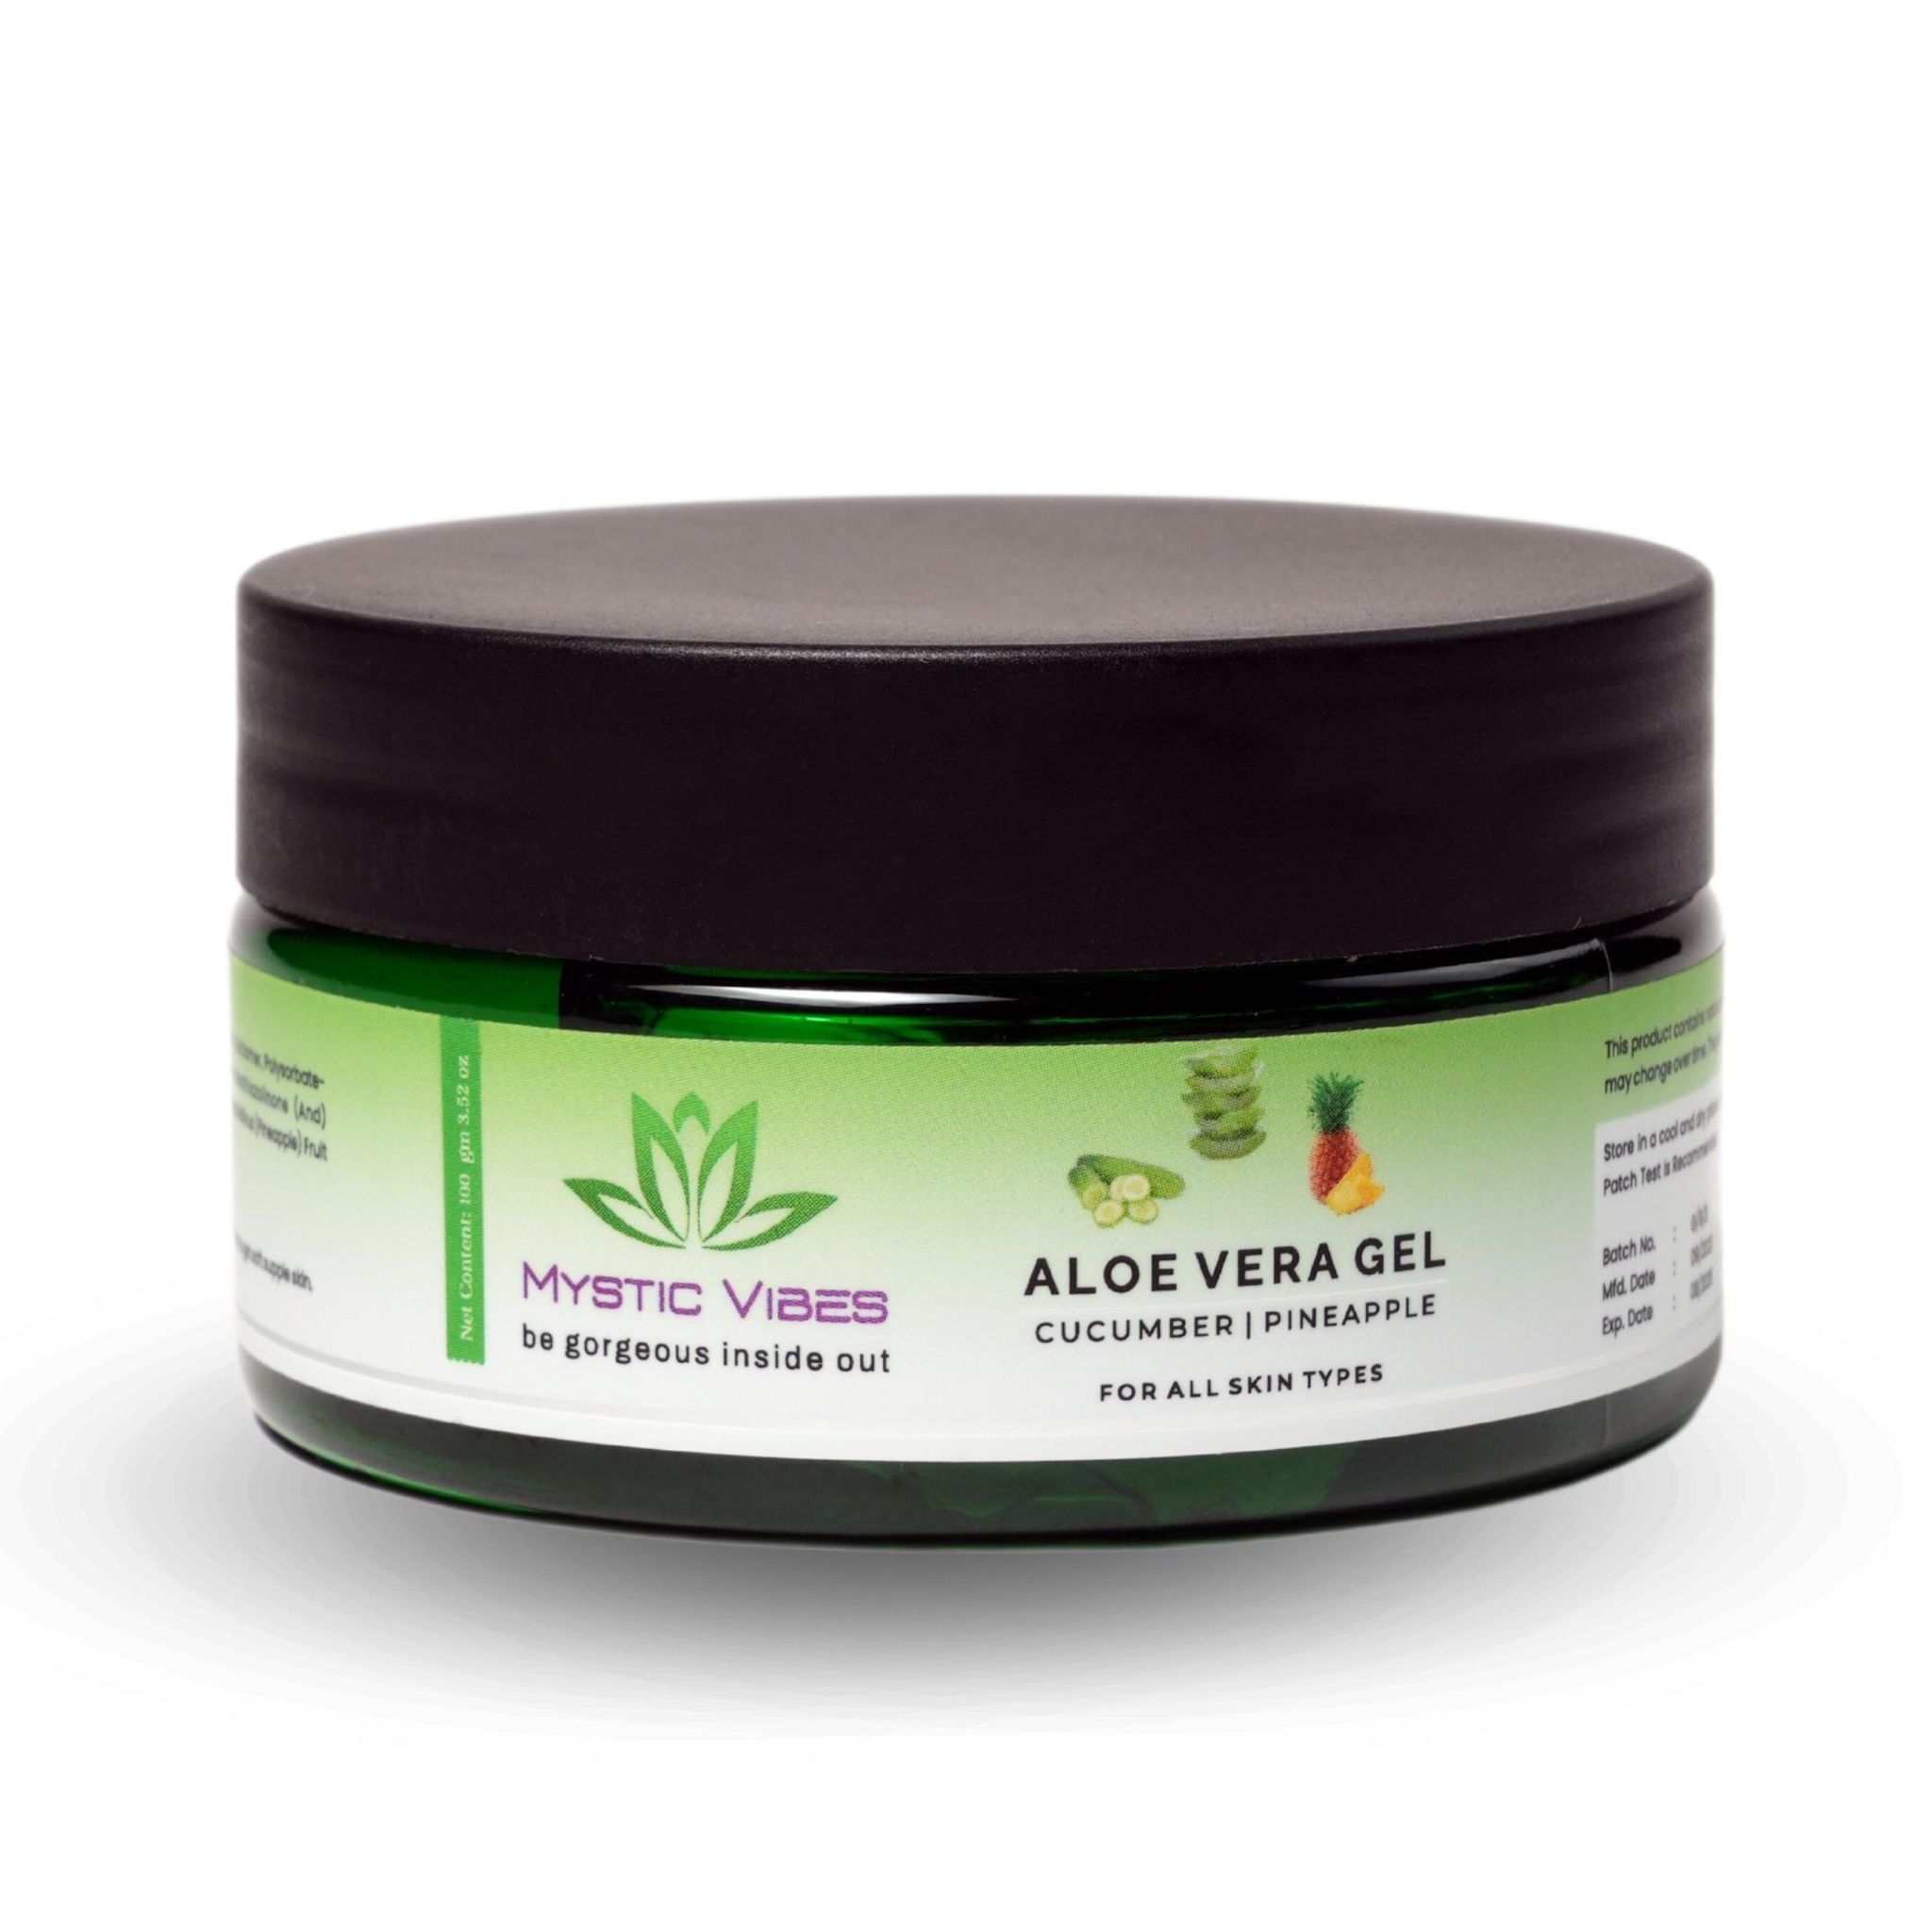 Mystic Vibes Aloe Vera Gel, with Aloe Vera, Pineapple, and Cucumber for Skin and Hair - 100 gm…